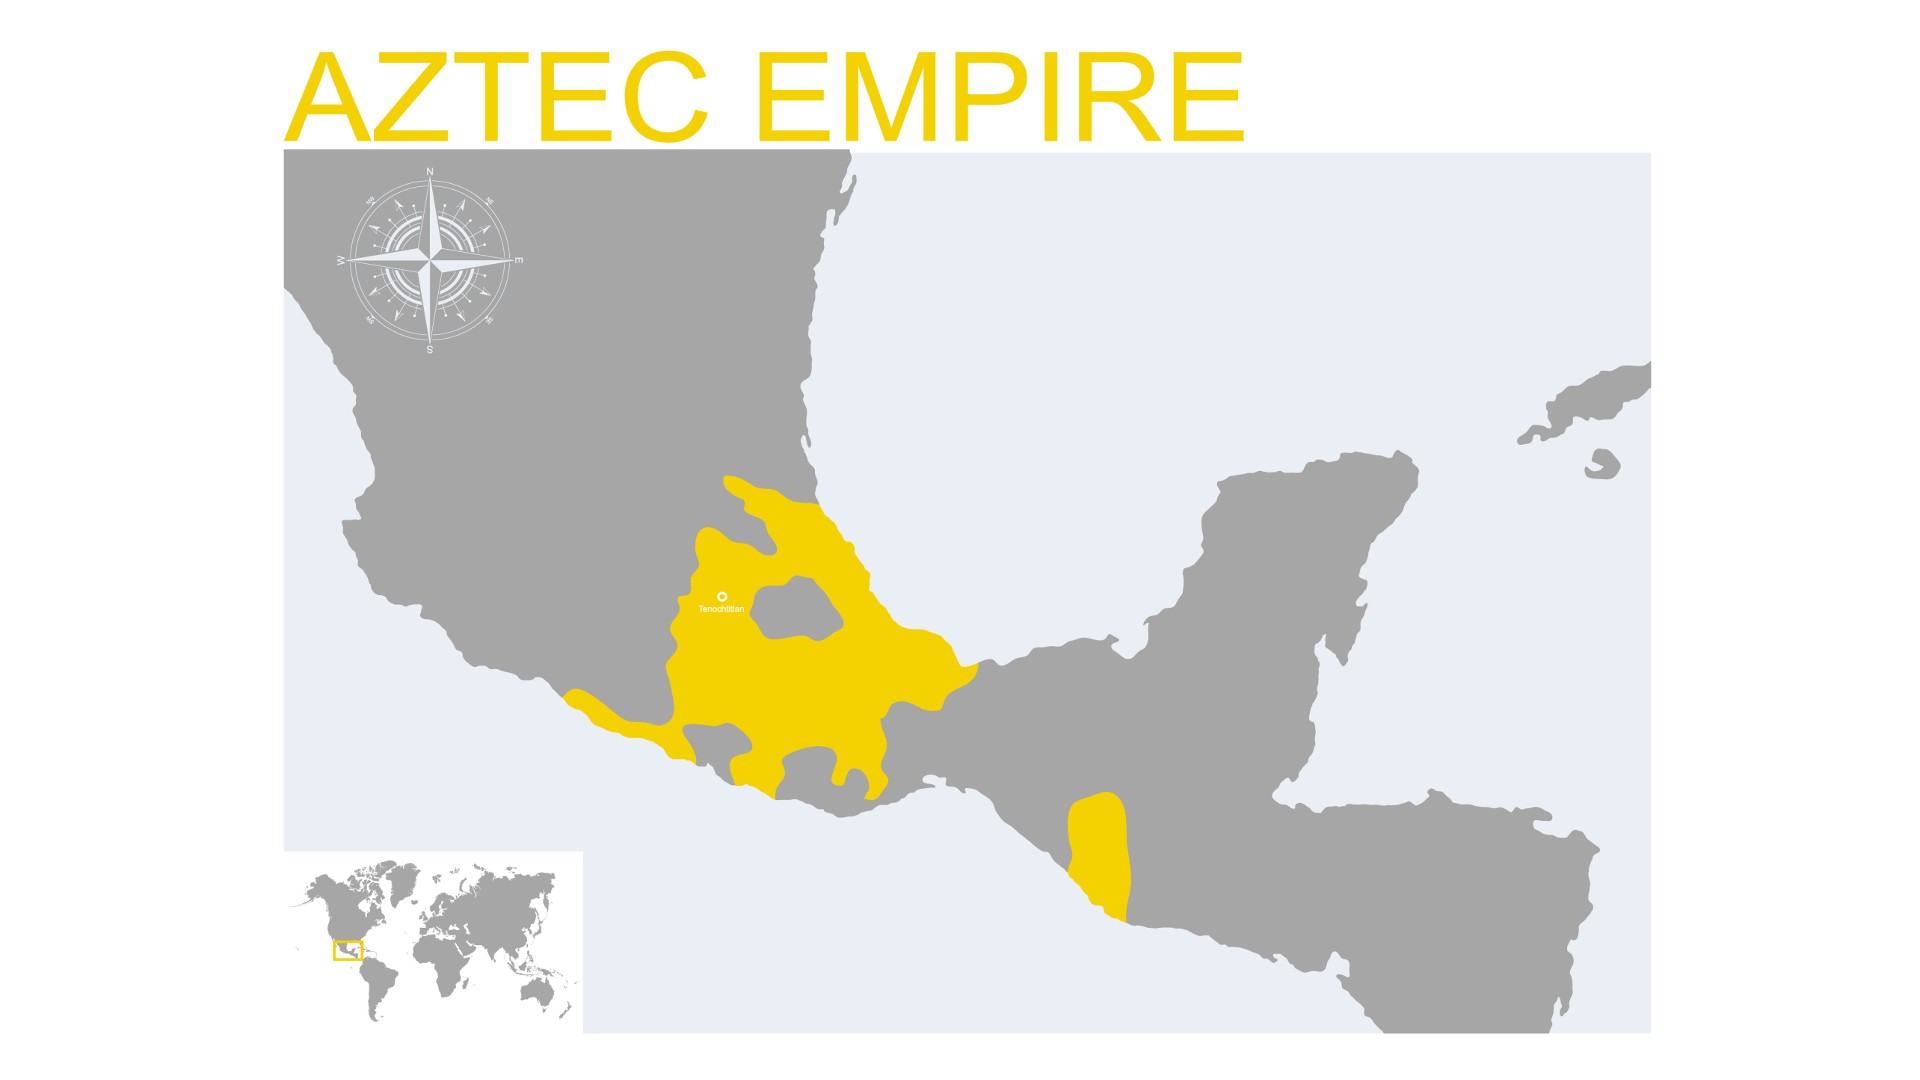 Map of the Aztec Empire. The lower quarter of Mexico is highlighted.